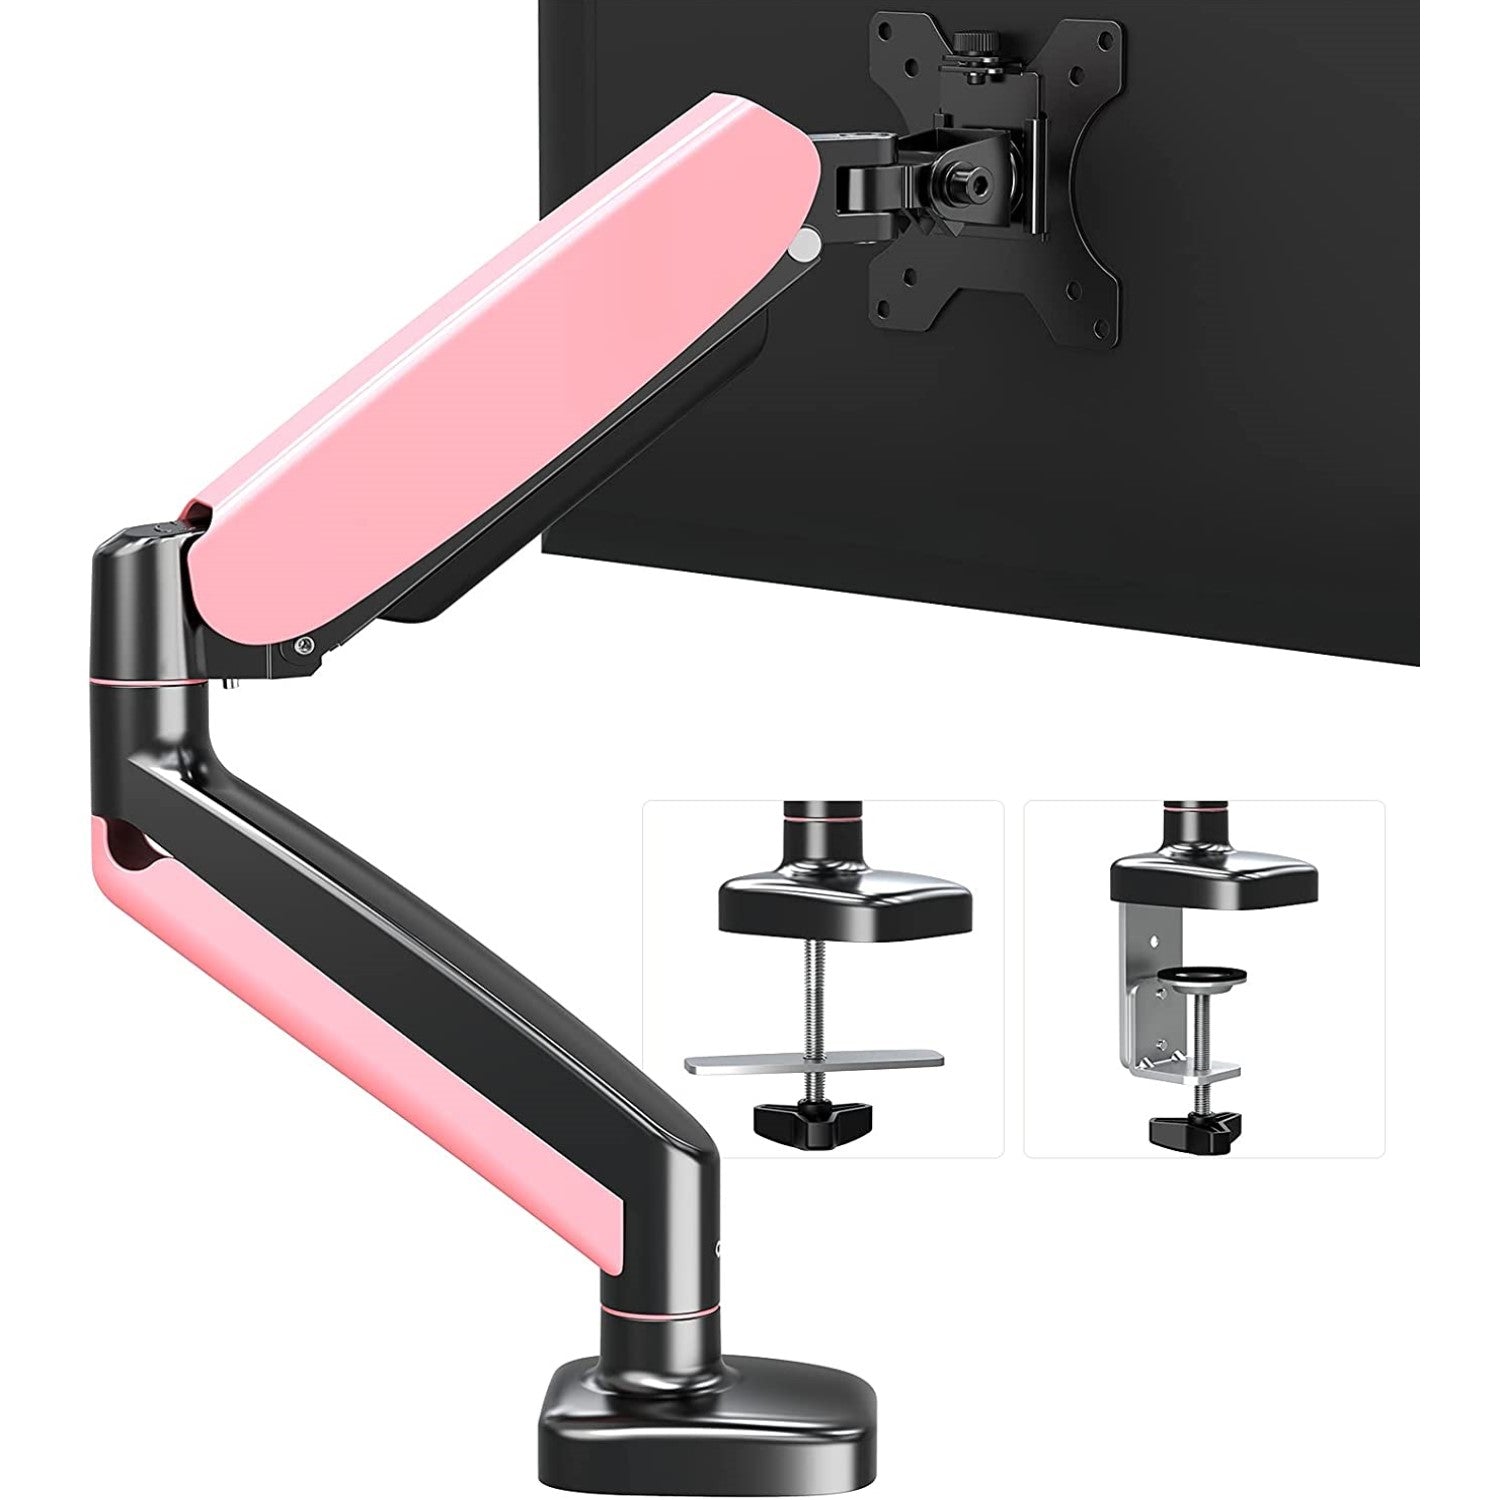 Smatto Pink Monitor Desk Mount for Monitor up to 32'' – WOKA